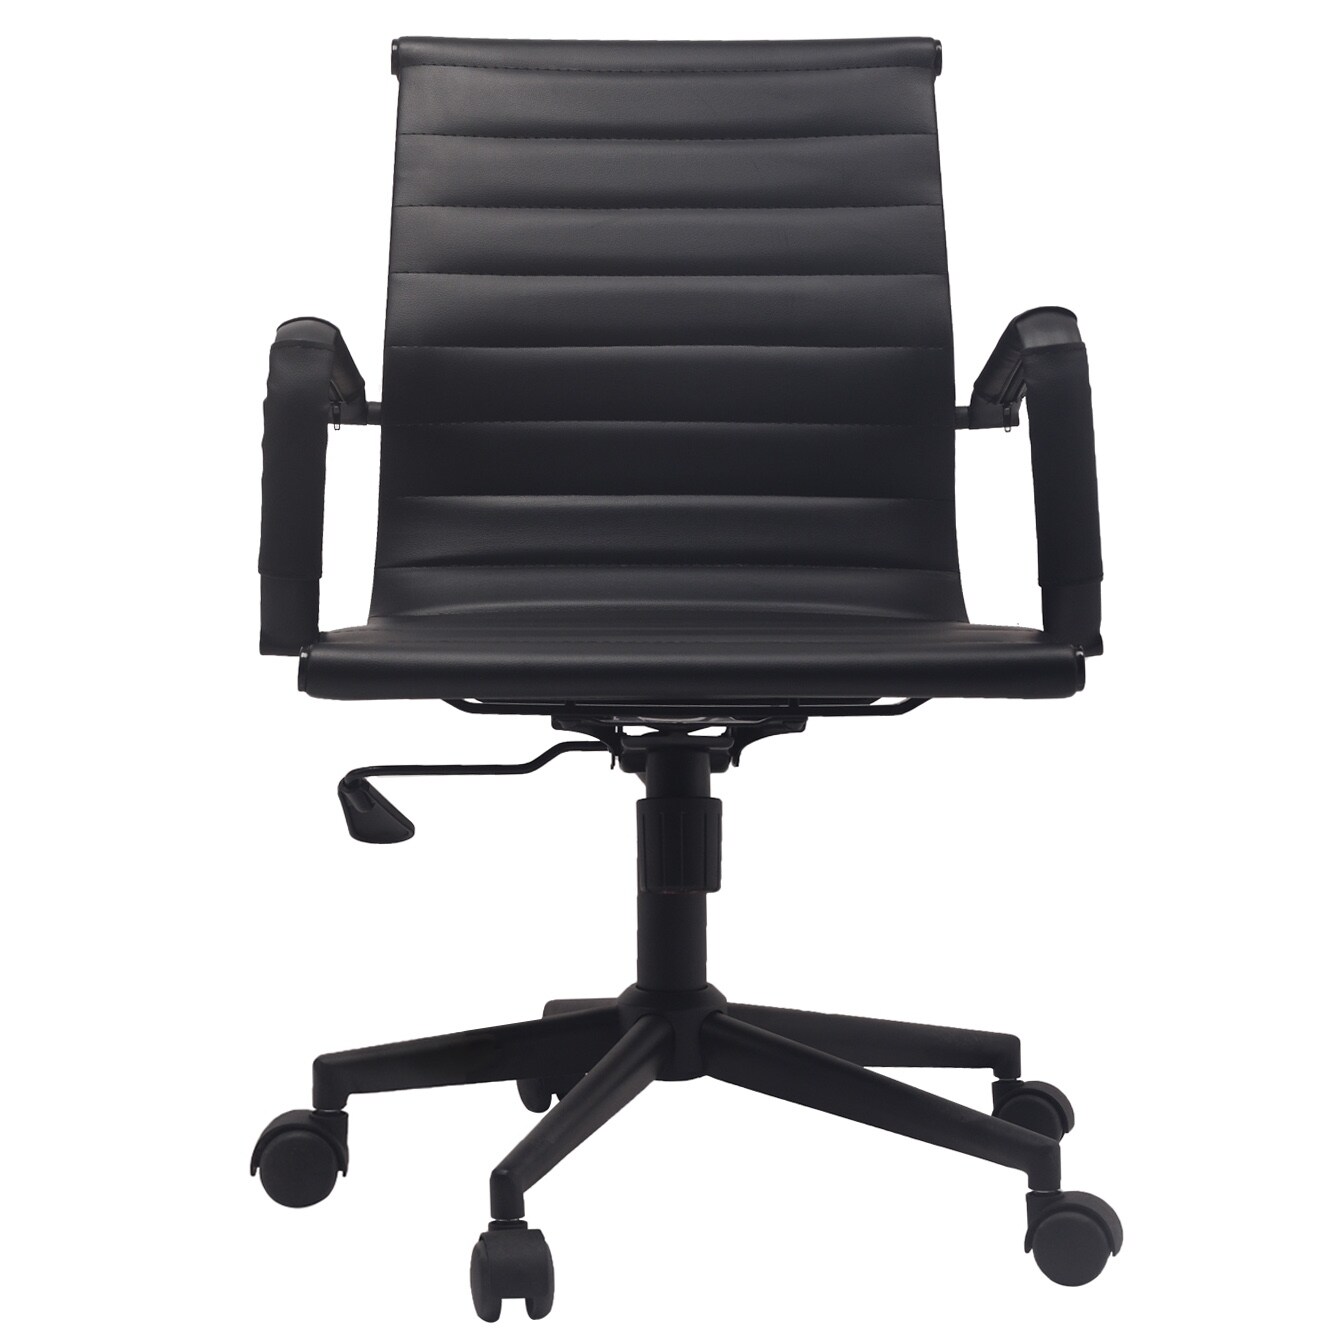 https://ak1.ostkcdn.com/images/products/is/images/direct/4ff0b2f350488501549fed2cb9a384757b340a4c/Office-Chair-Mid-Back-Tan-Ergonomic-Adjustable-Height-Swivel-With-Padded-Arms-Wheels-Work-Executive-Task.jpg